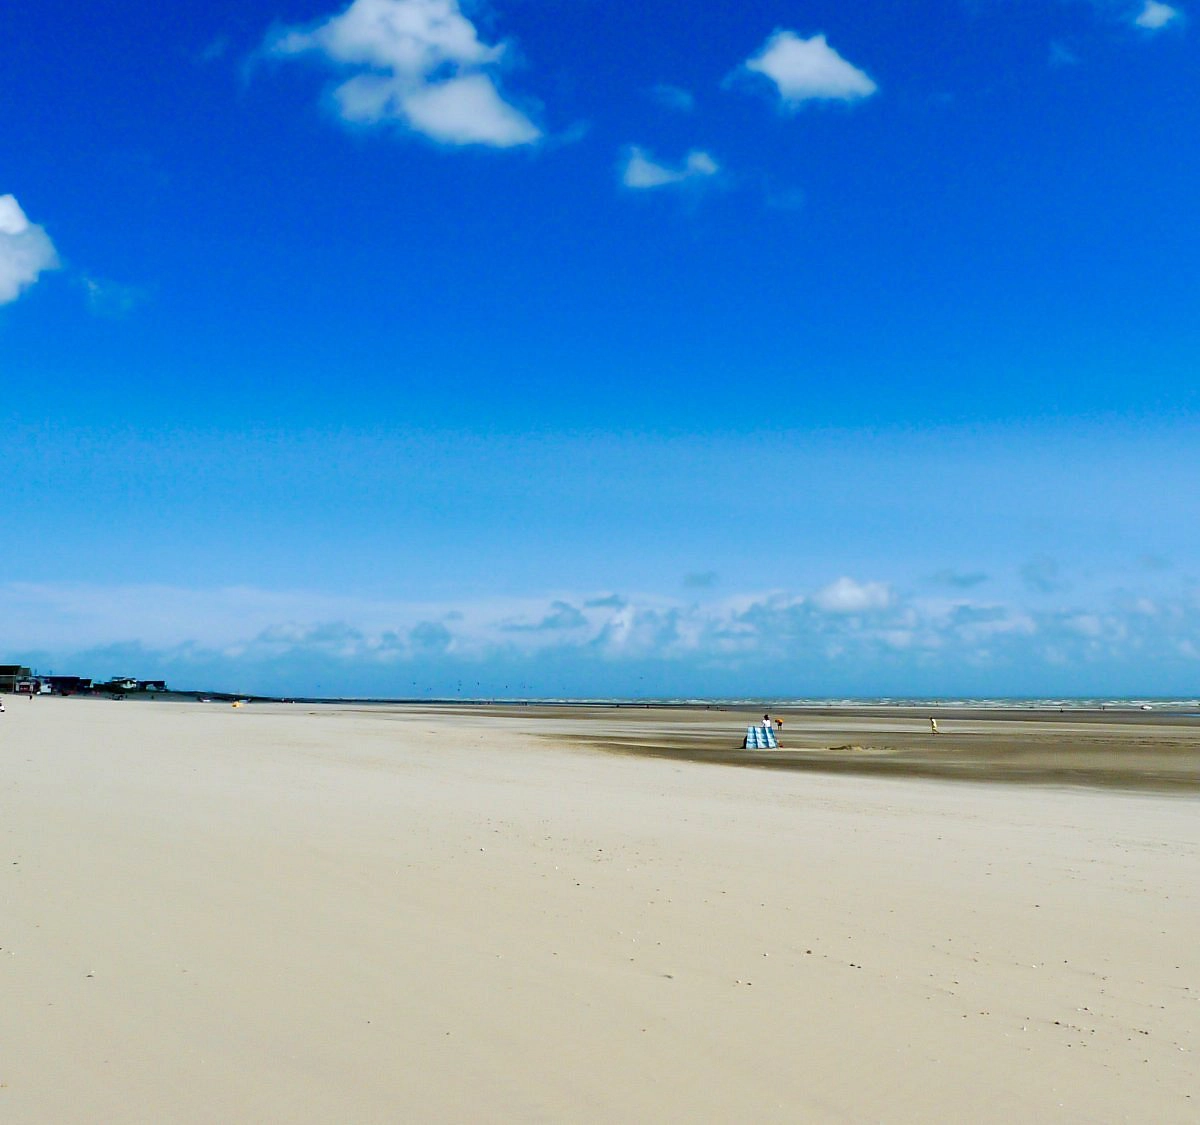  Camber Sands  strand - Great Britain